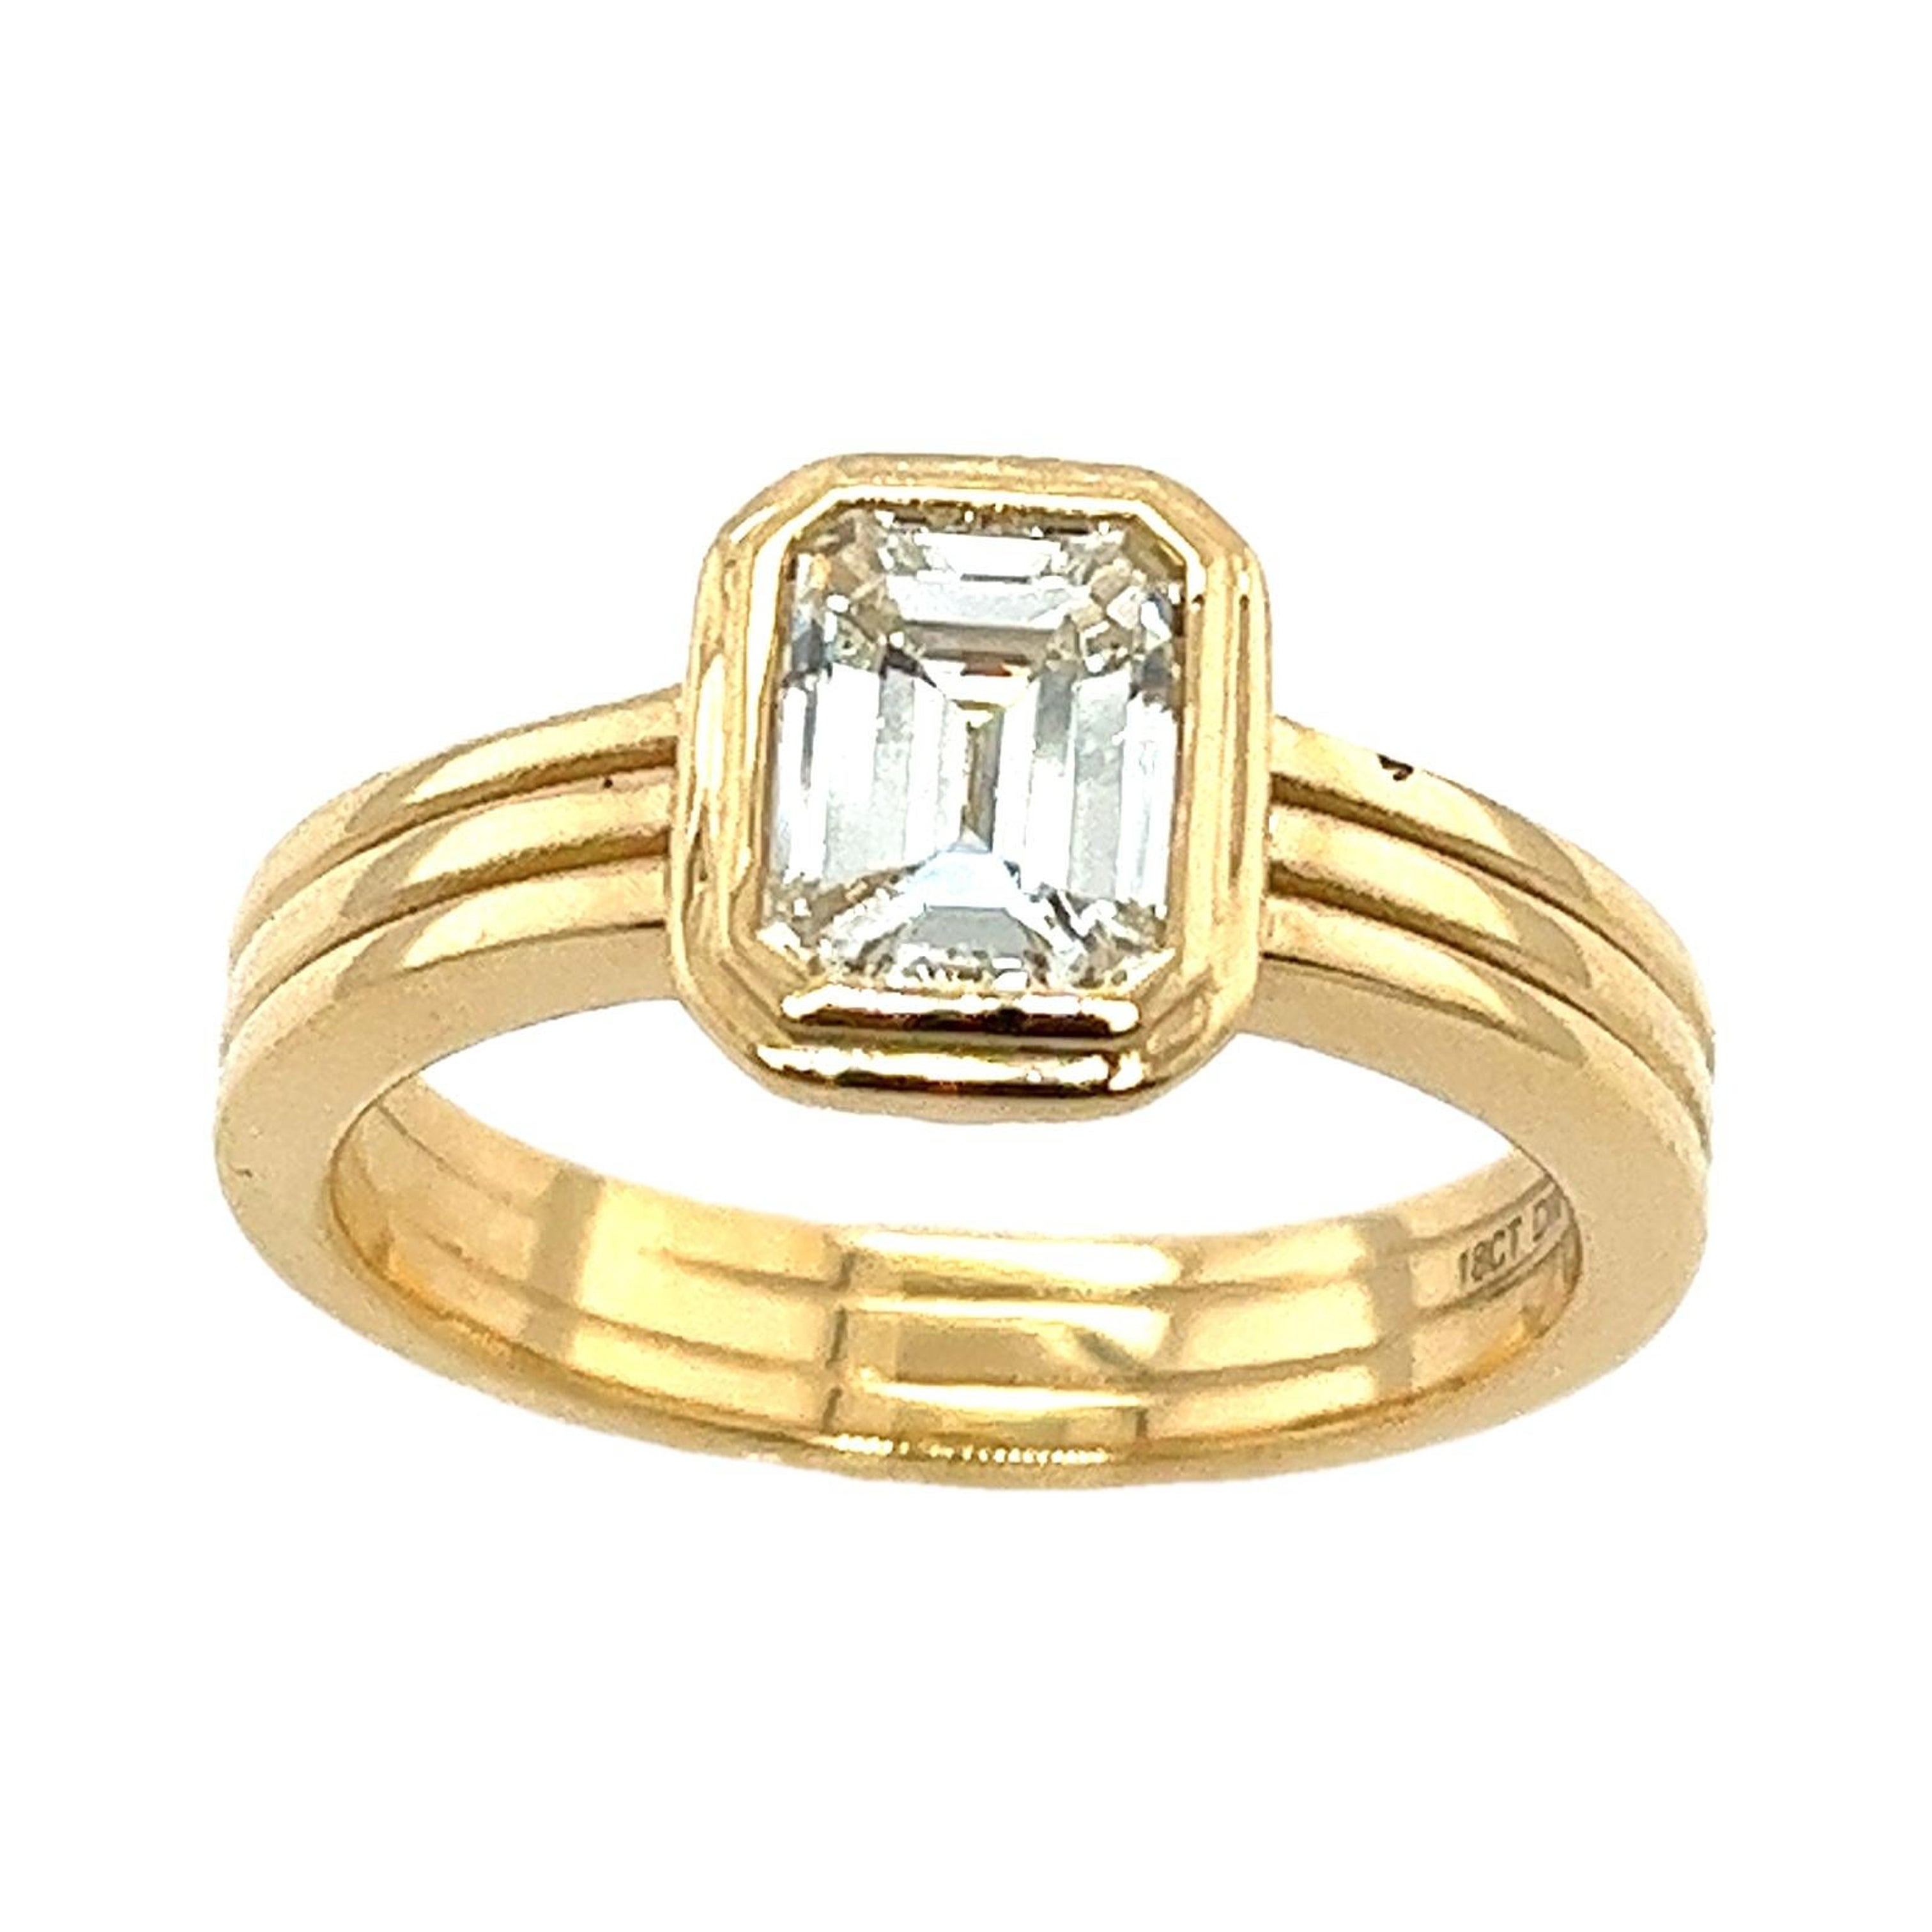 Diamond Solitaire Ring Set With 1.01ct K/VS2 Emerald Cut Diamond, In 18ct Gold For Sale